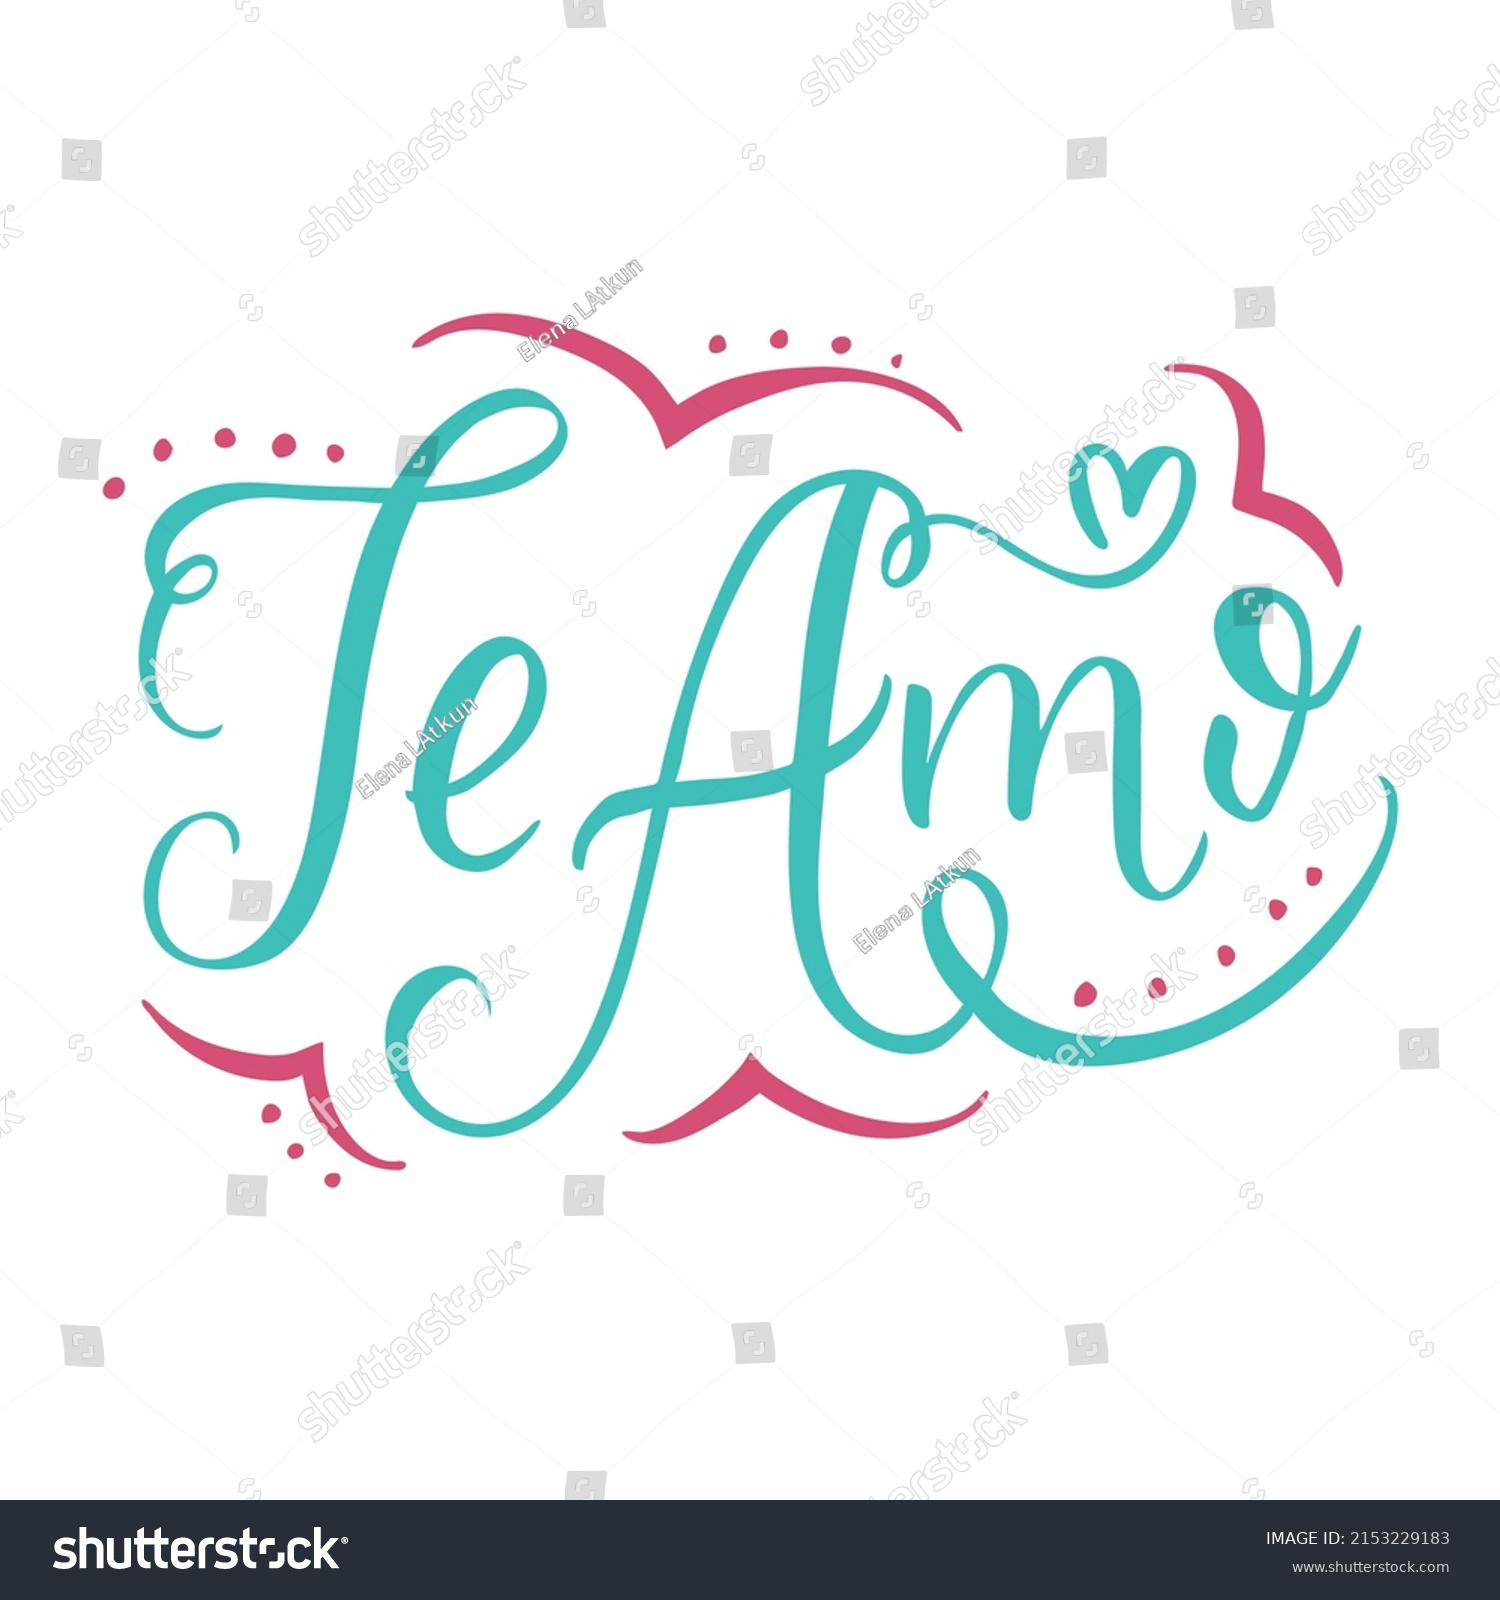 Te Amo Lettering Design High Quality Stock Vector (Royalty Free ...